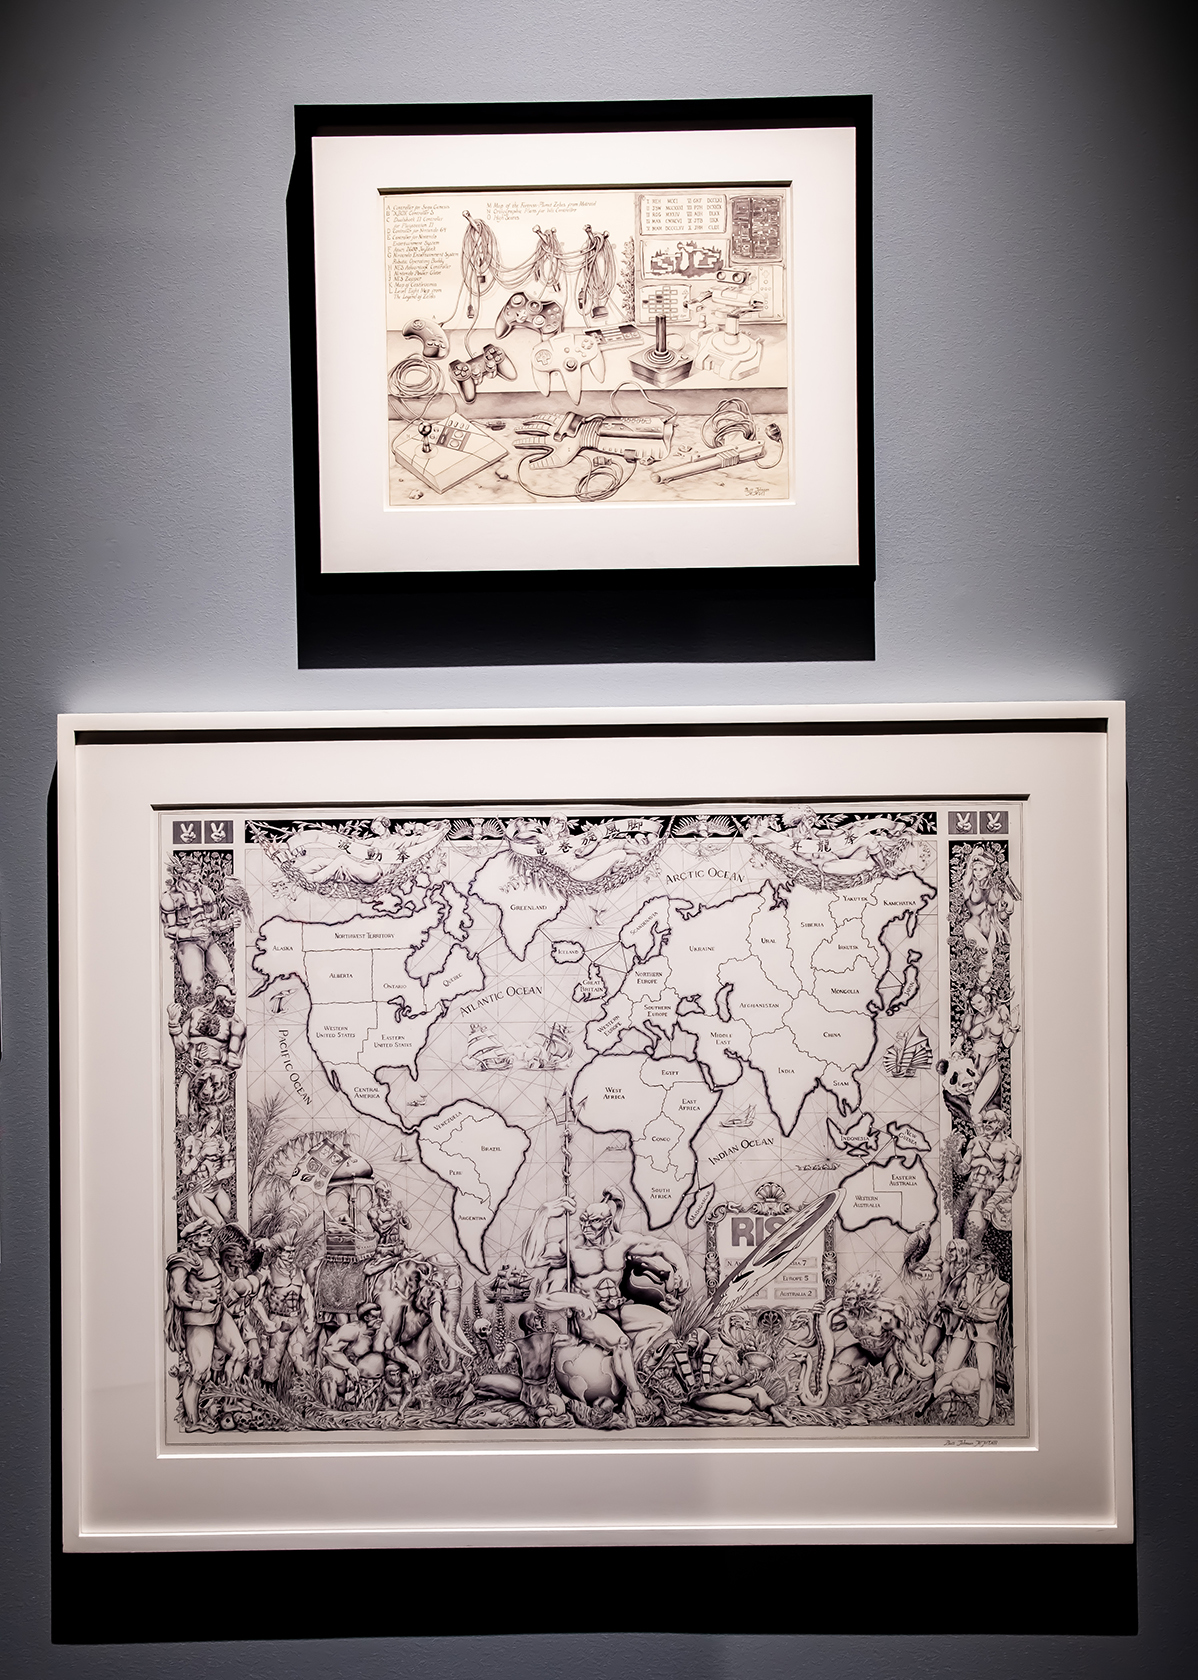 Two detailed drawings hang in frames on a gray gallery wall, one includes a map similar to a Risk board with figures at the bottom, and the other is of various video game controllers